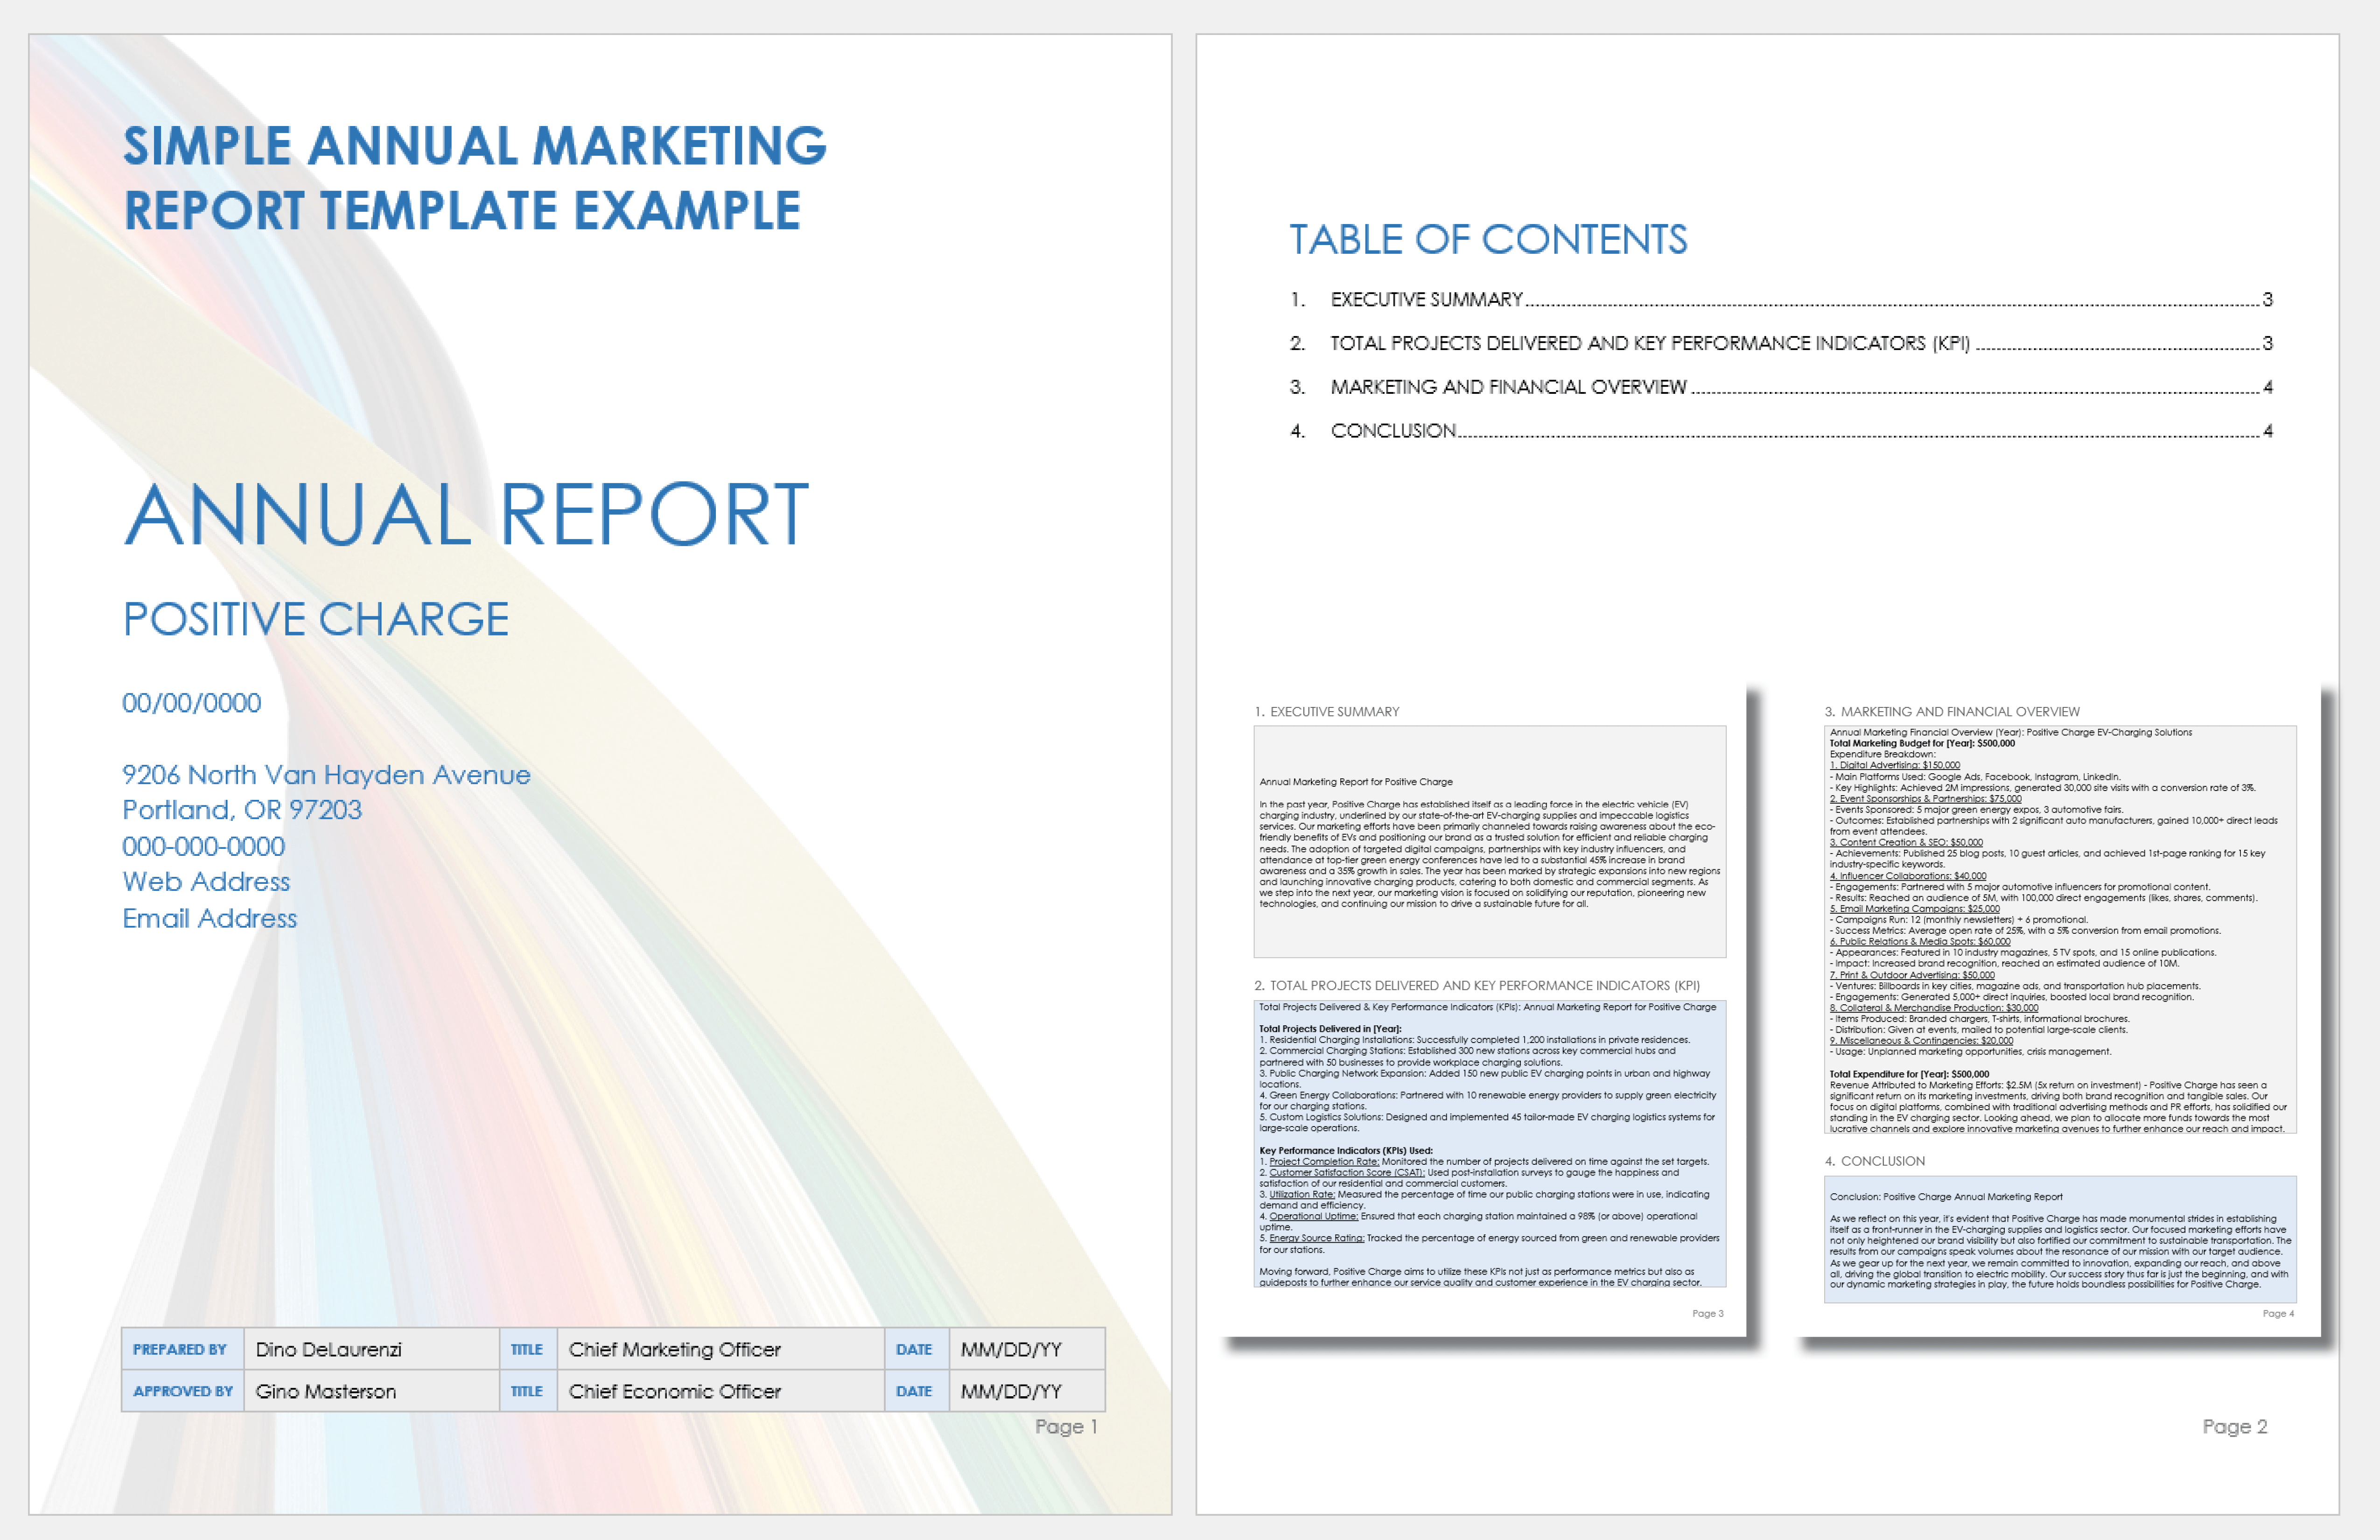 Simple Annual Marketing Report Example Template